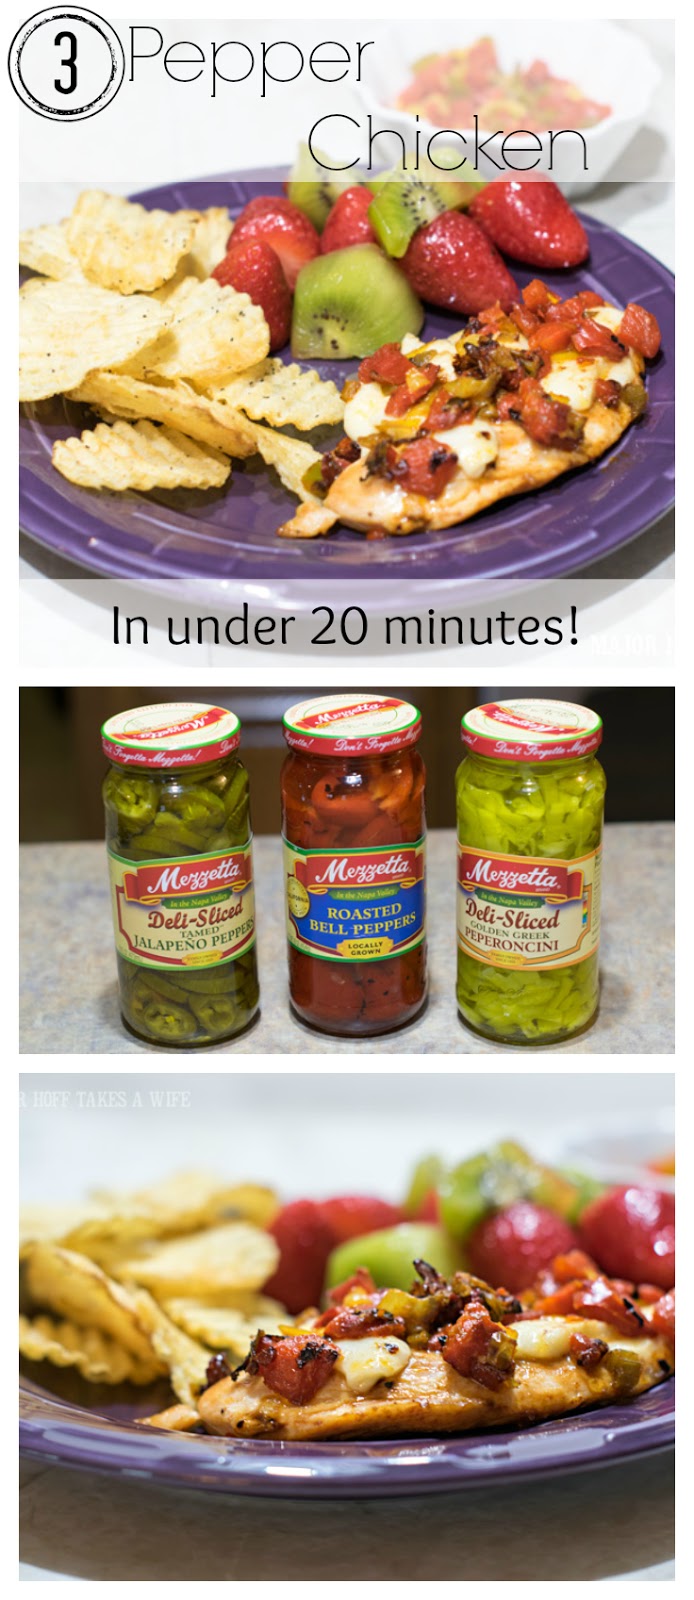 Holiday Memories with Mezzetta! These easy lunch or dinner will have you sailing through the holidays. Casual enough for everyday, but colorful enough for a holiday feast! Features 3 different peppers and packs a flavorful punch! All in less than 20 minutes! There is also a coupon for Mezzetta products as well as a chance to win 1 of 31 Holiday Gift Baskets! #MezzettaMemories #SharingJoy